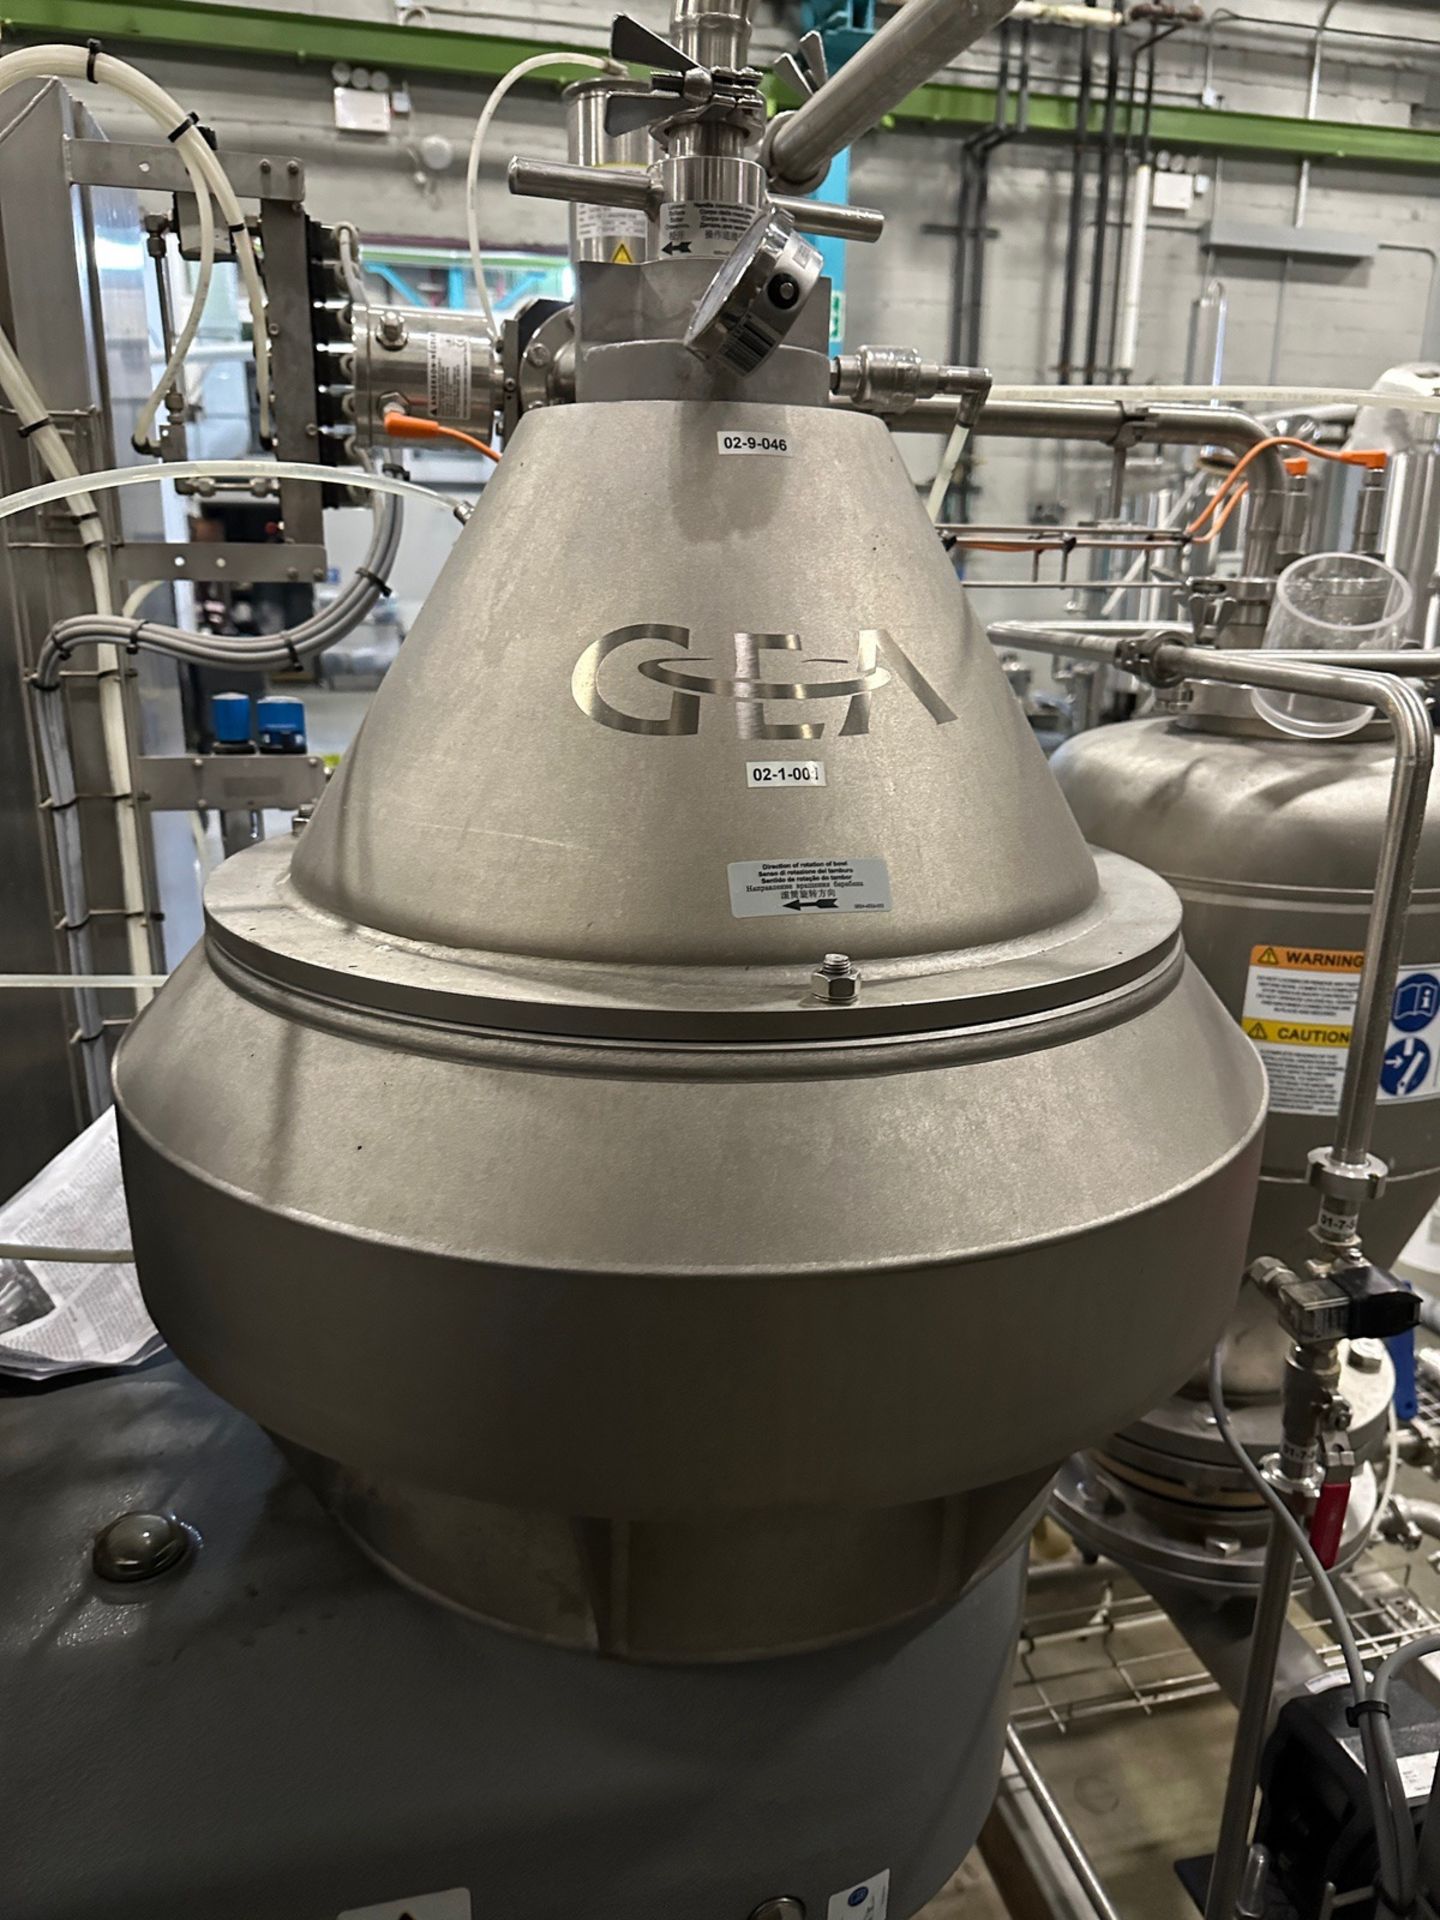 2019 GEA Westfalia Model GSC 40-06-077 Centrifugal Separator, S/N: 1739-532, with S | Rig Fee $650 - Image 7 of 17